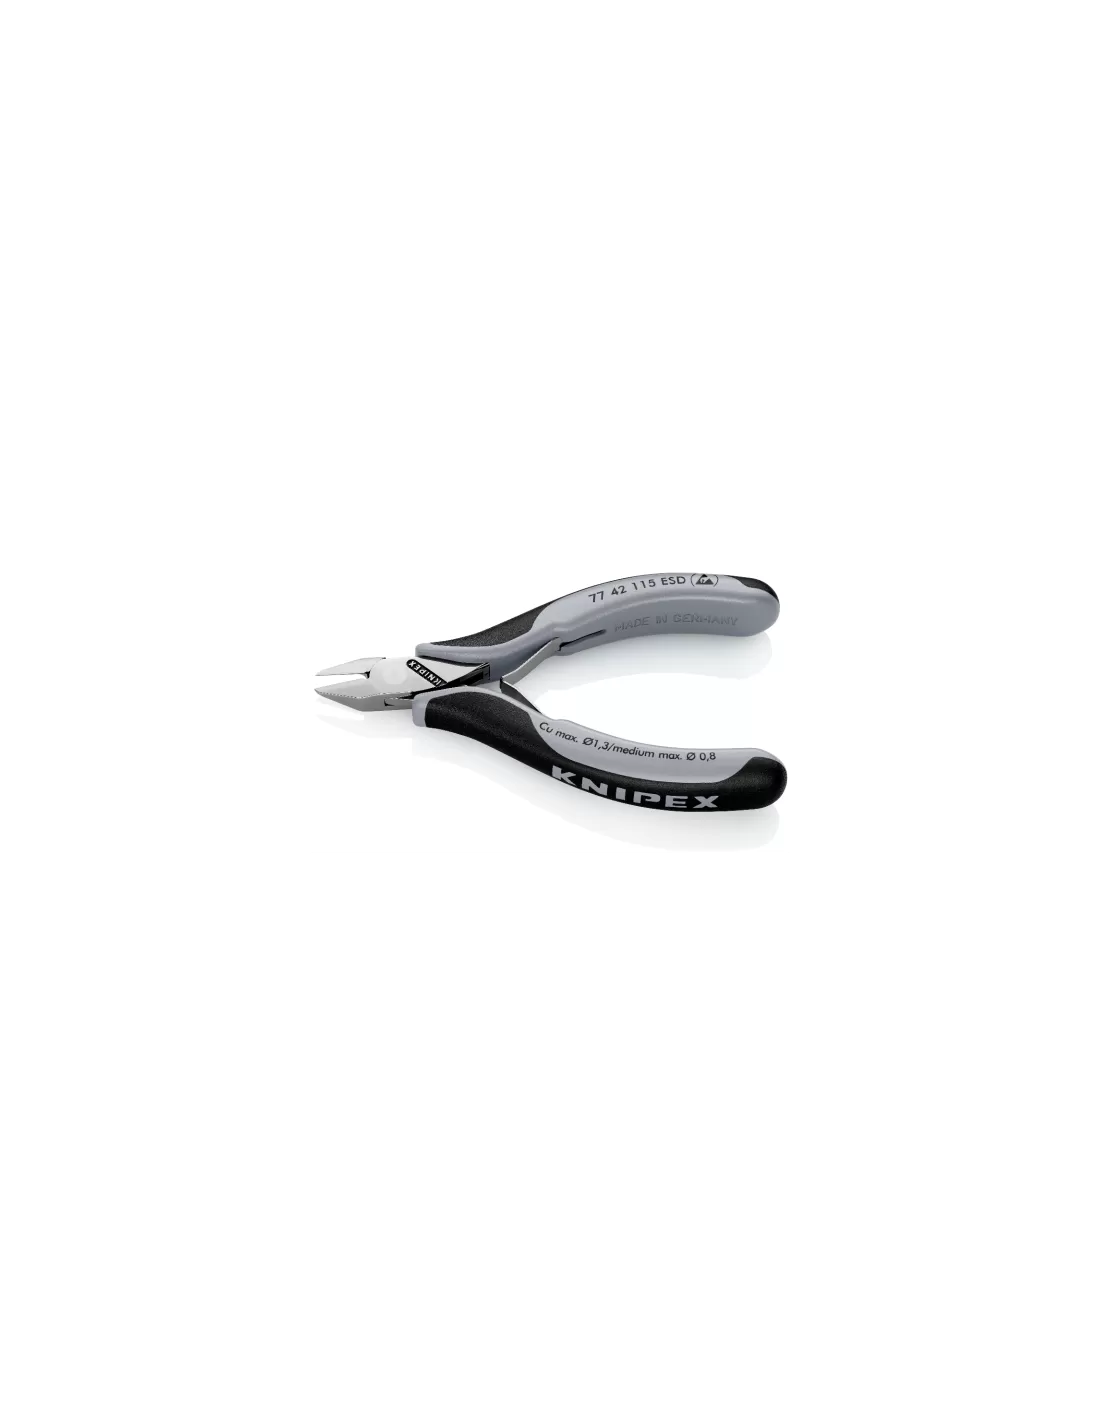 Pince coupante KNIPEX 29,22 €